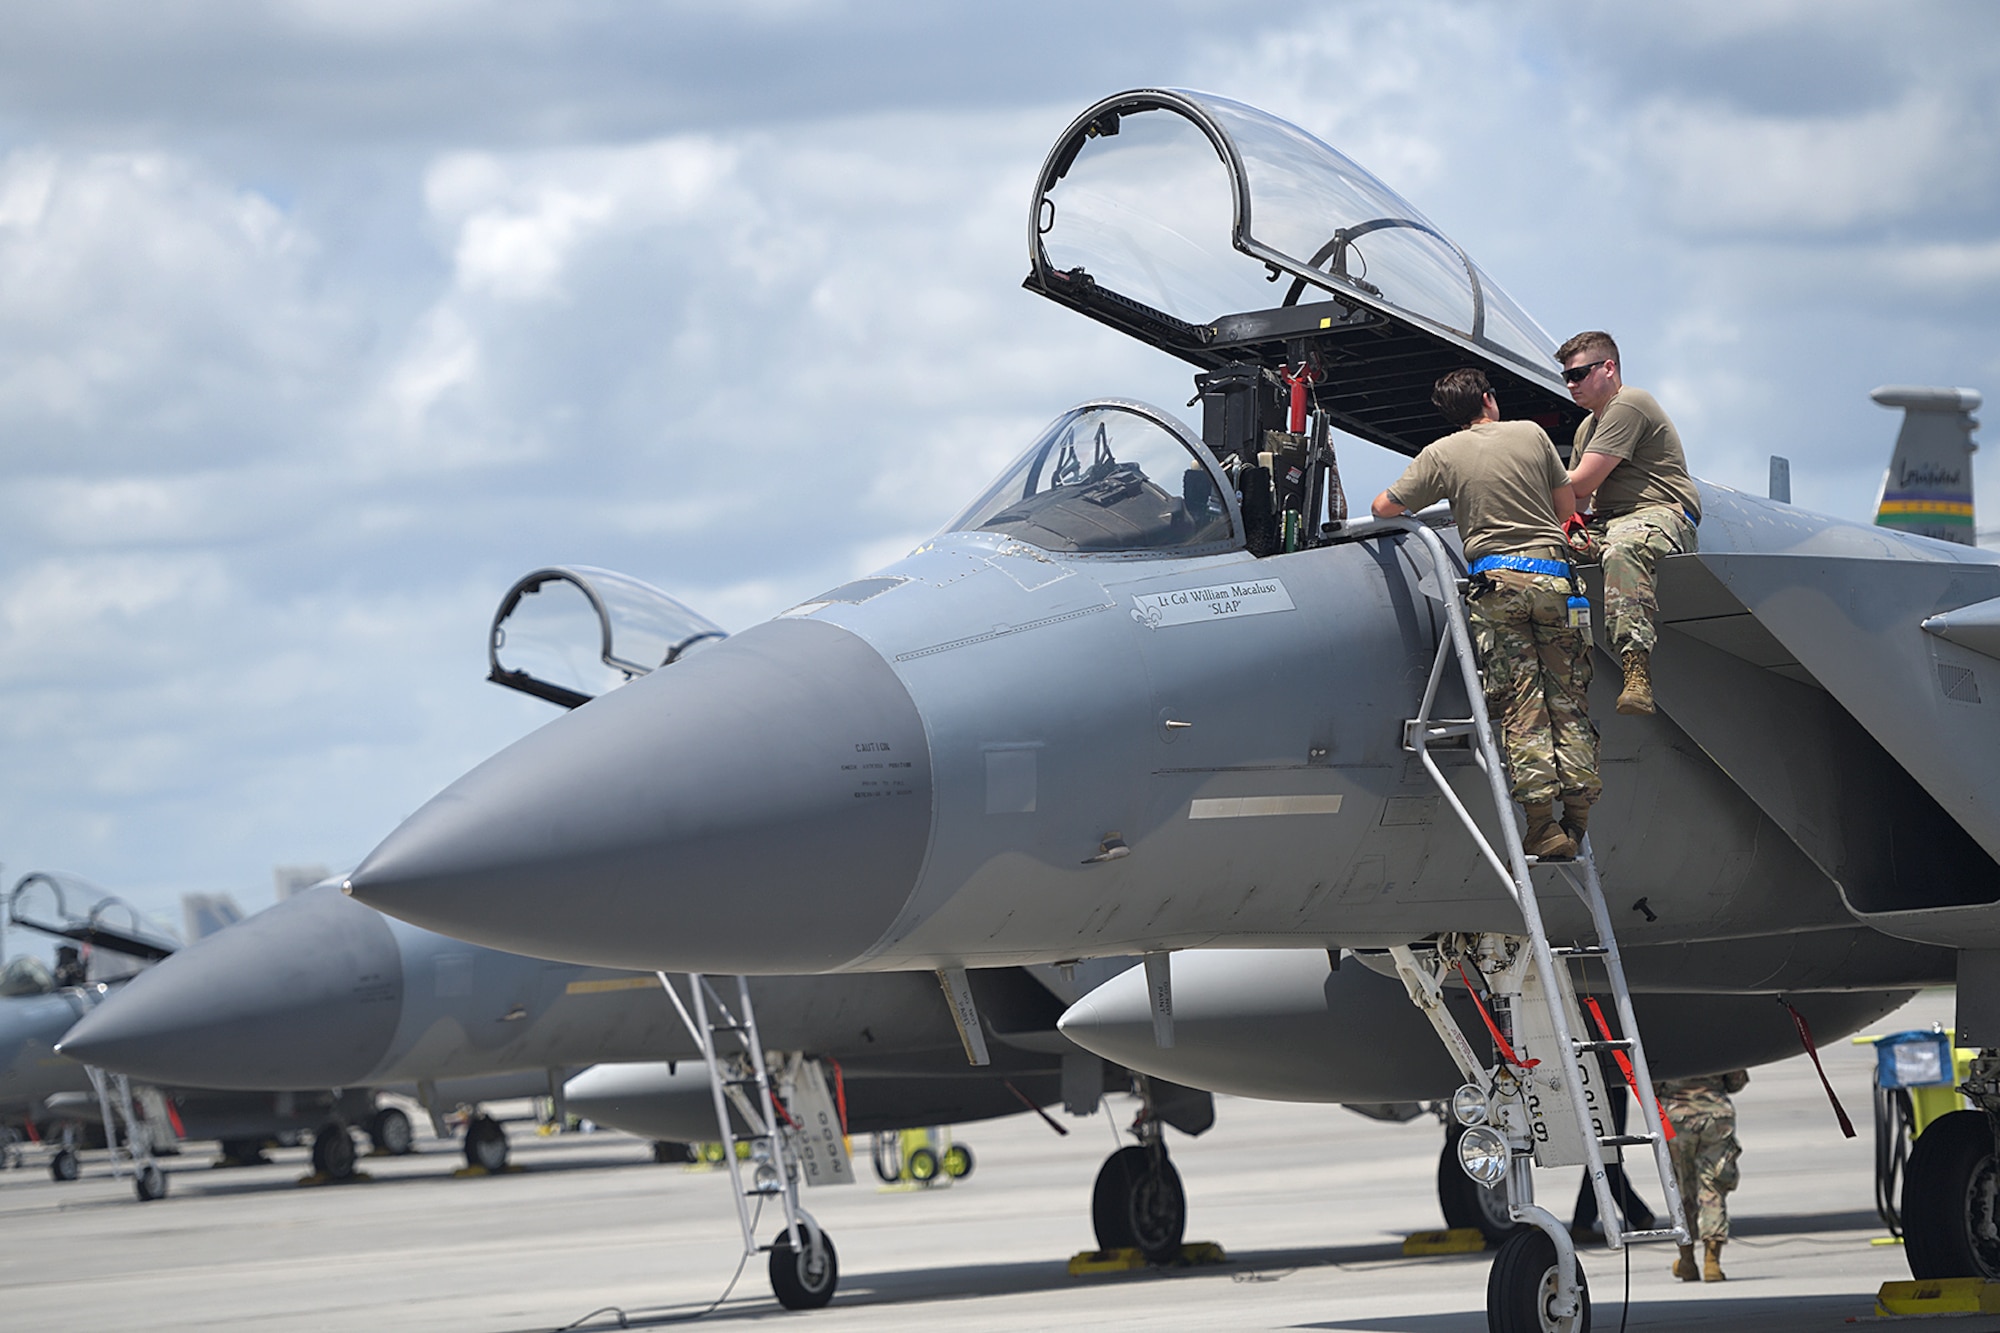 159th Maintenance Group crew chiefs inspect an F-15C in preparation for takeoff at the Air Dominance Center in Savannah, Ga., June 9, 2021. Six Louisiana Air National Guard F-15s deployed to the ADC to participate in dissimilar aircraft training, which allows pilots to hone their tactical skills with other combat airframes.